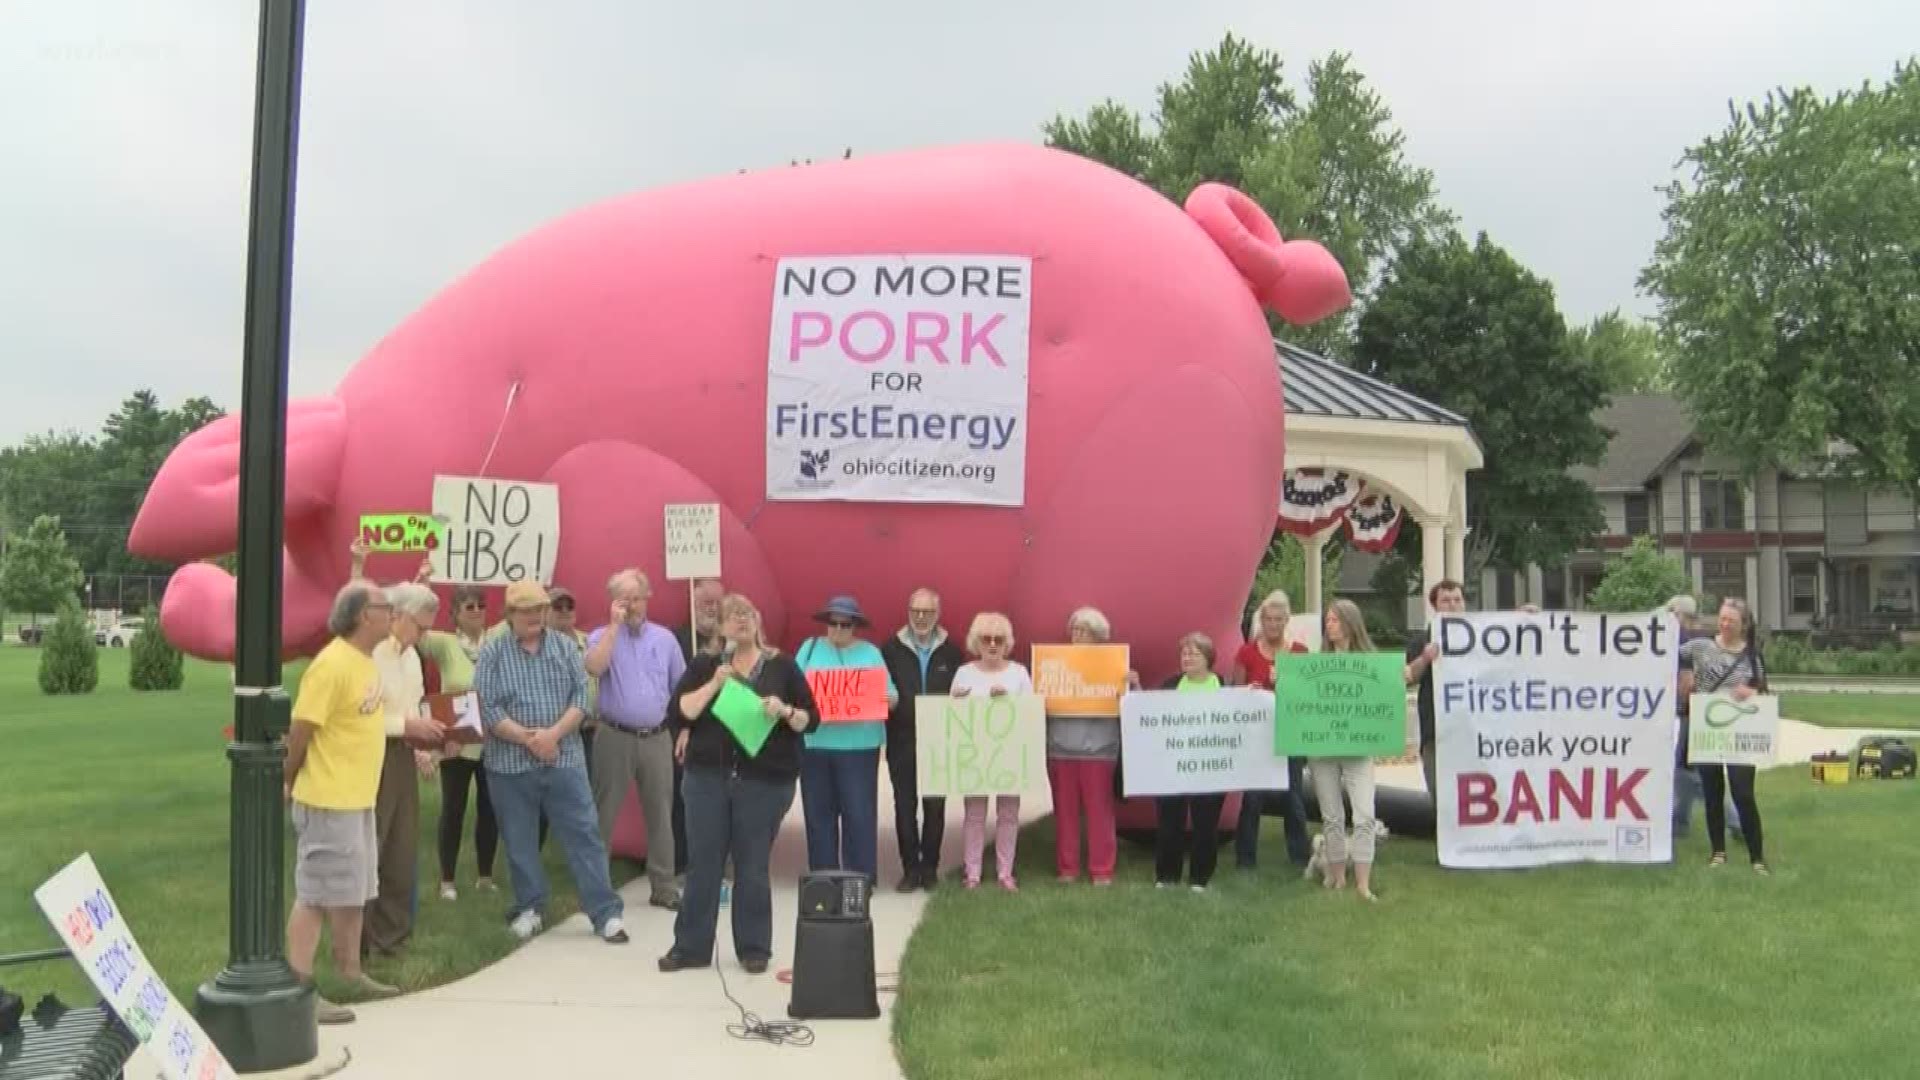 Protesters say bill will harm environment and cost city hundreds of thousands of dollars every year. Bowling Green has invested in green energy with its solar field and wind turbines.